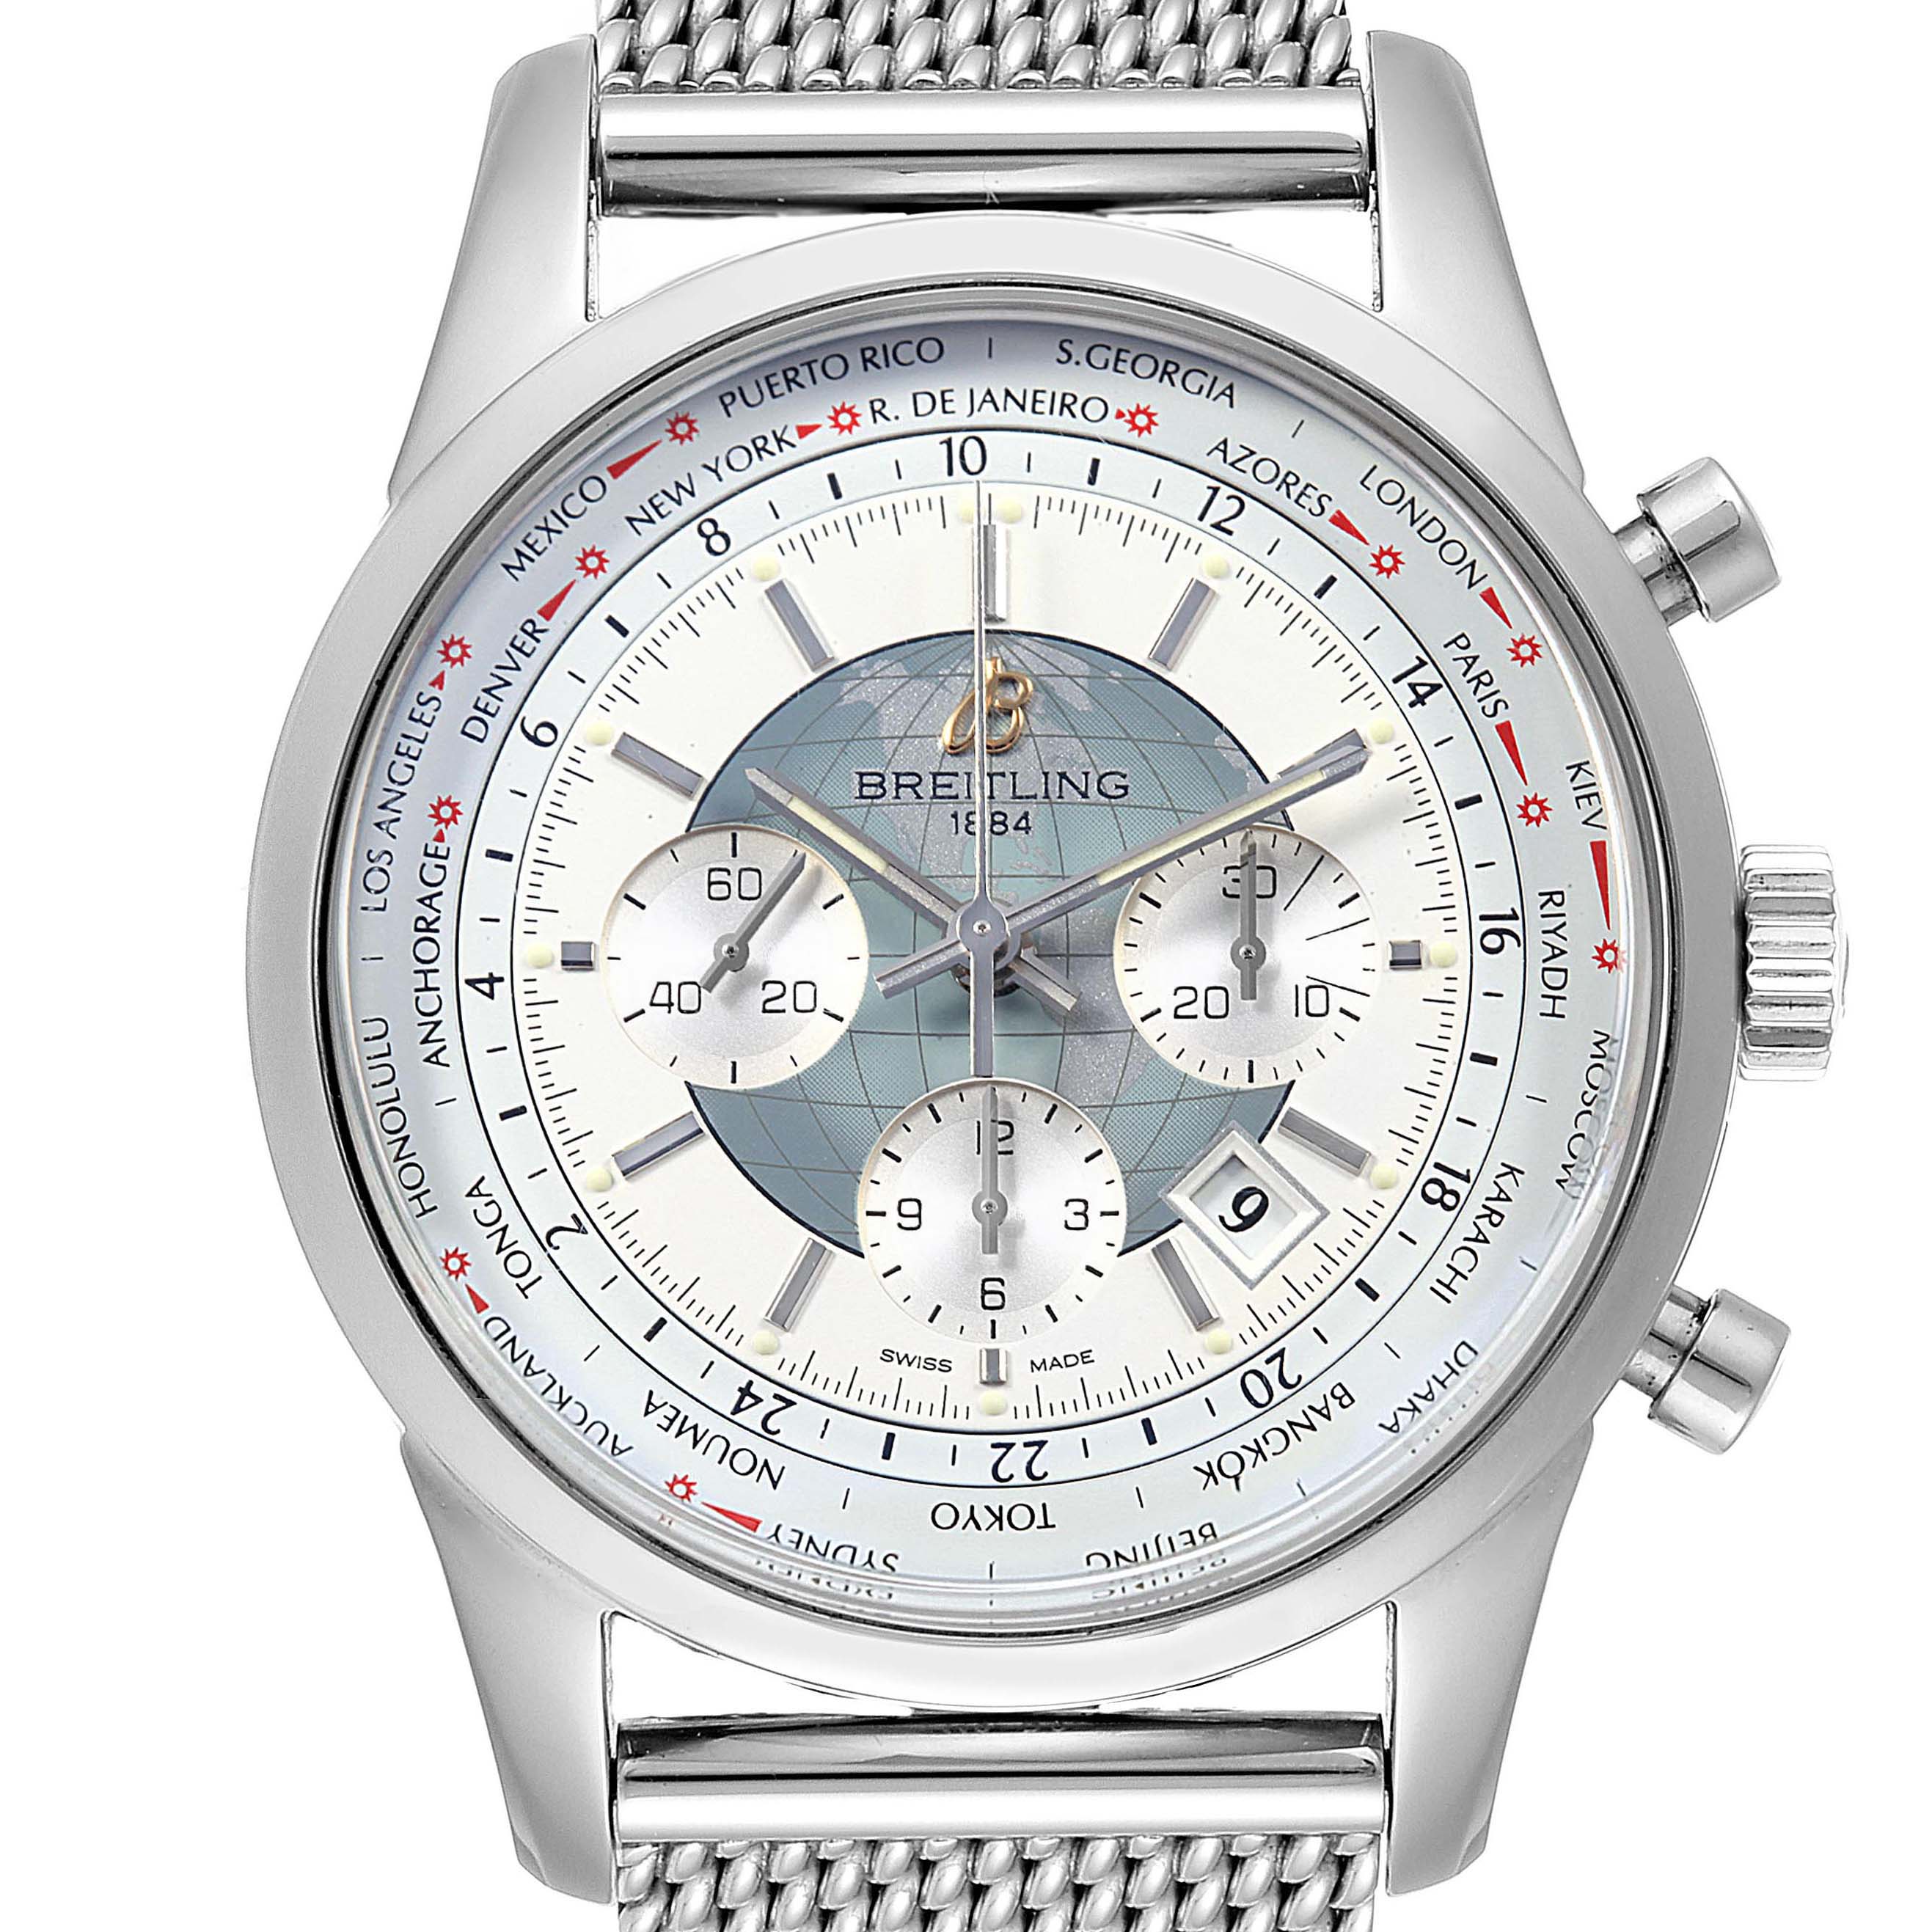 Breitling Transocean Unitime Chronograph AB0510 – Belmont Watches